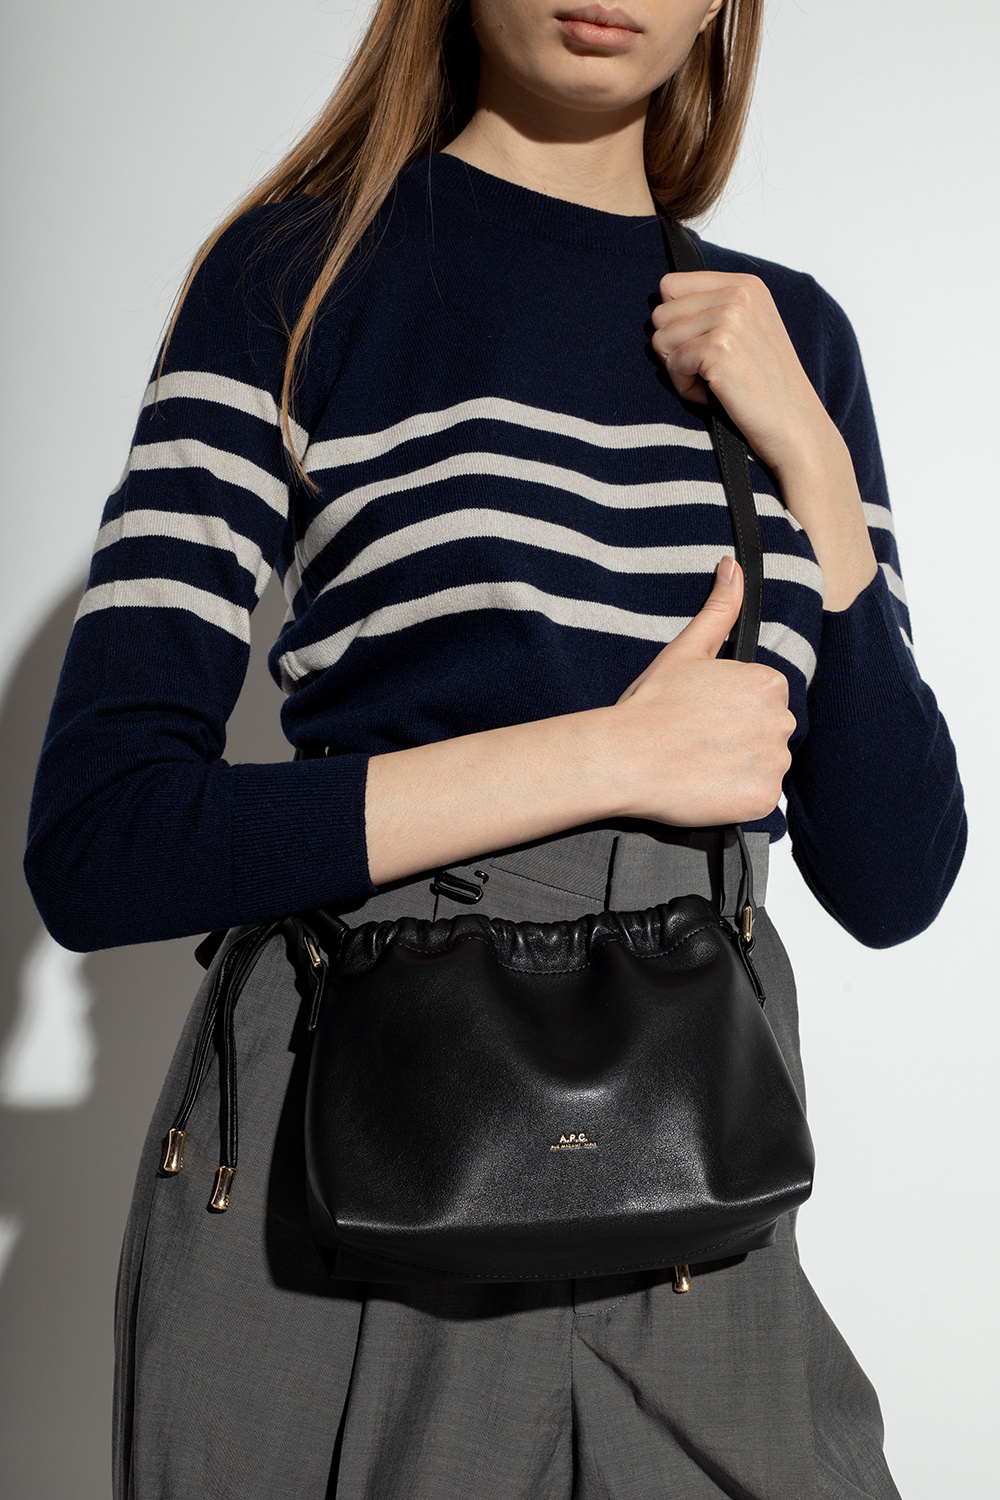 A.P.C. Casual Style Unisex Street Style Logo Shoulder Bags